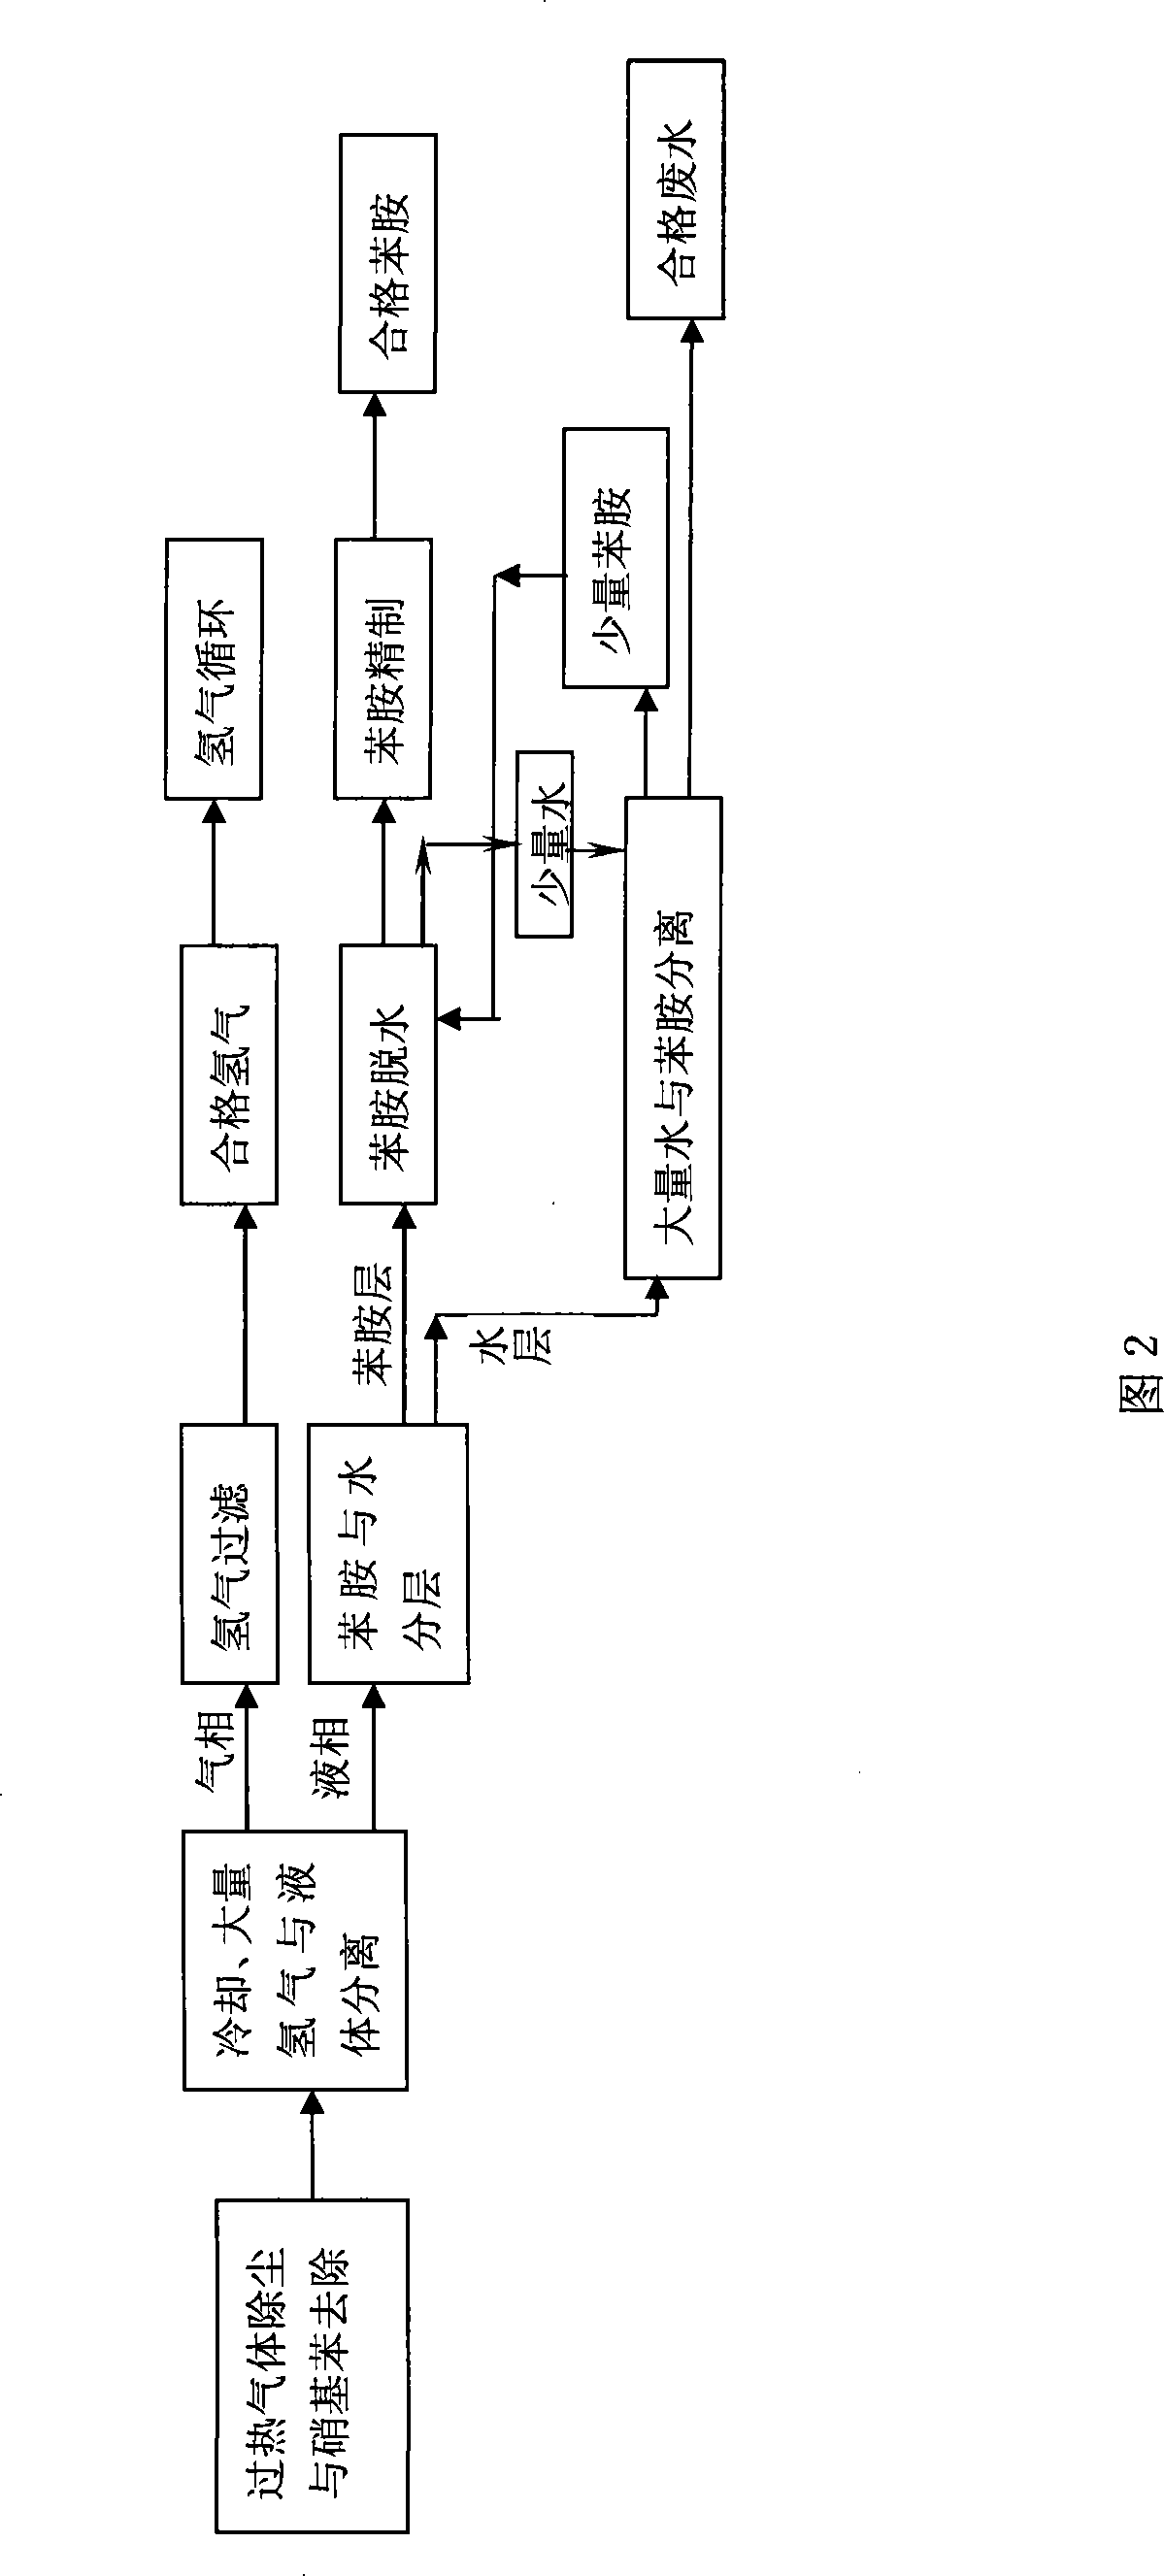 Aniline post processing system and method